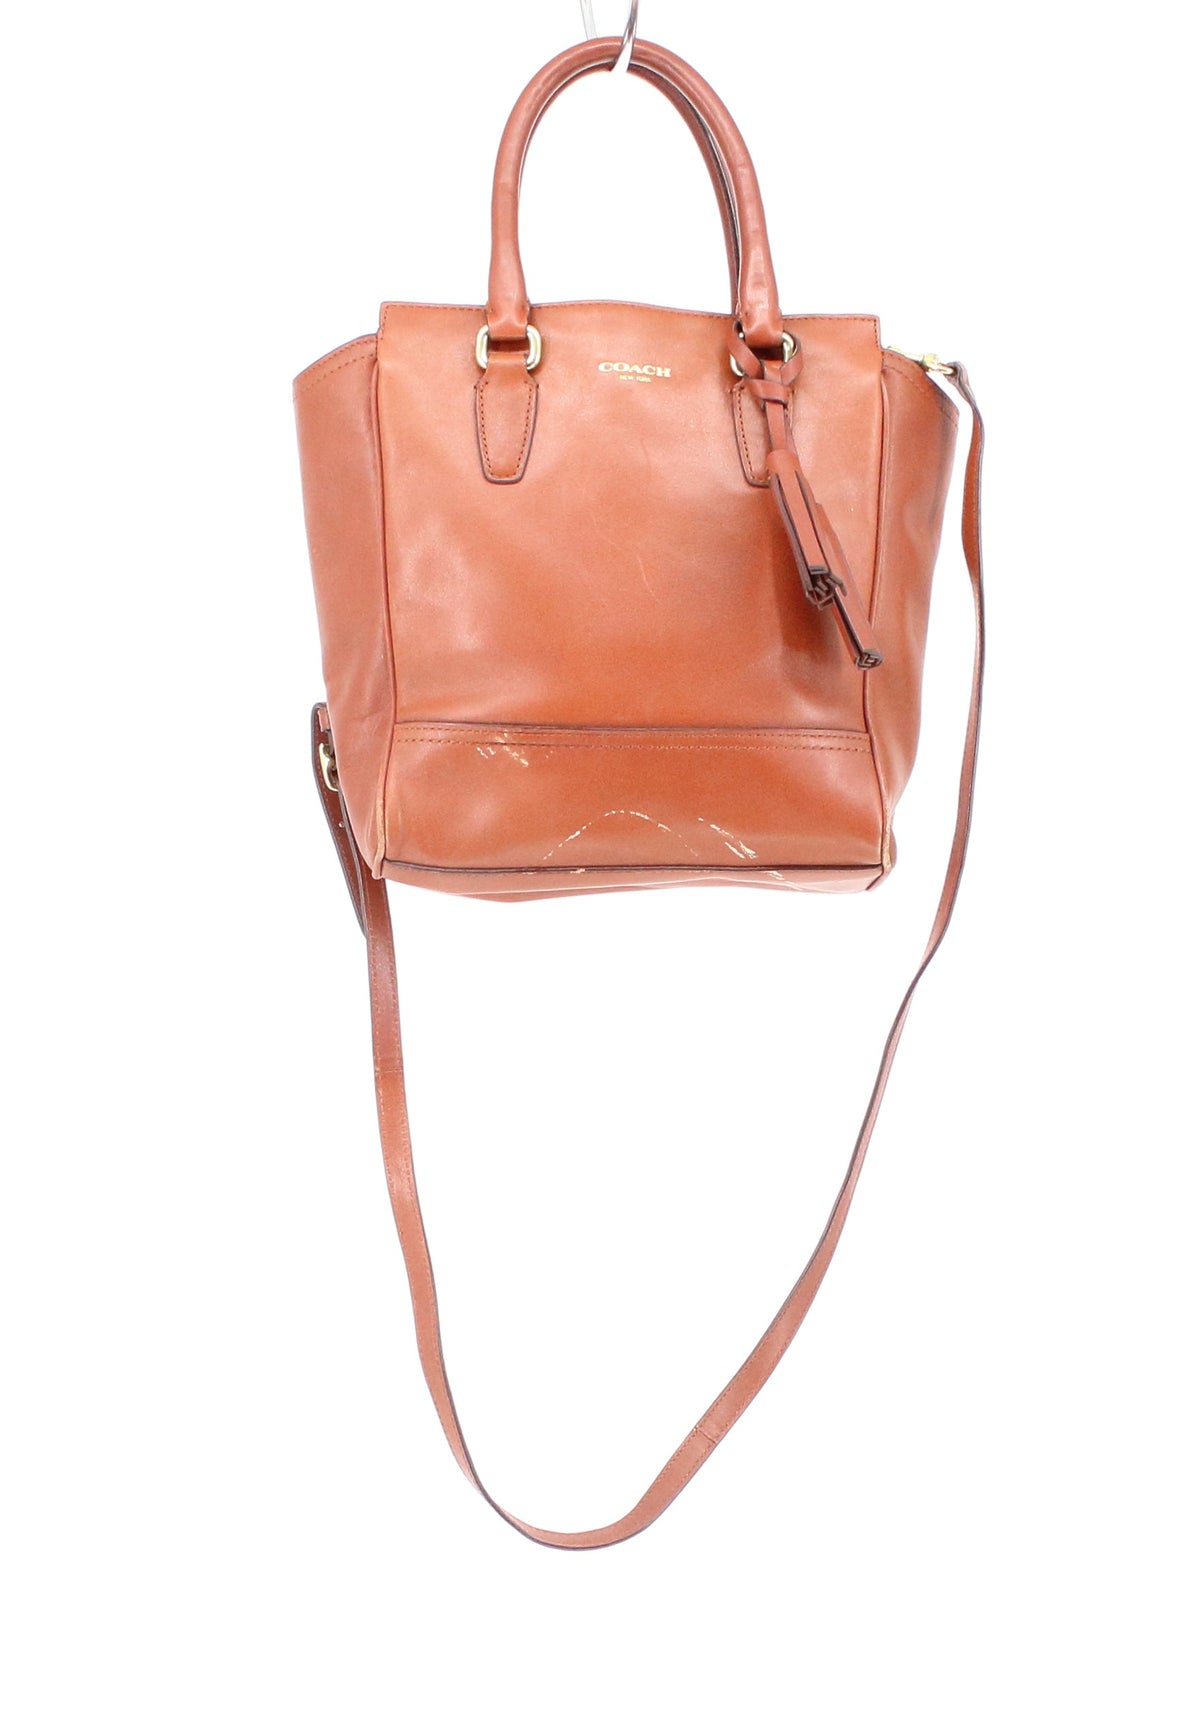 Coach Brown Leather Crossbody Bag With Zip Up Closure